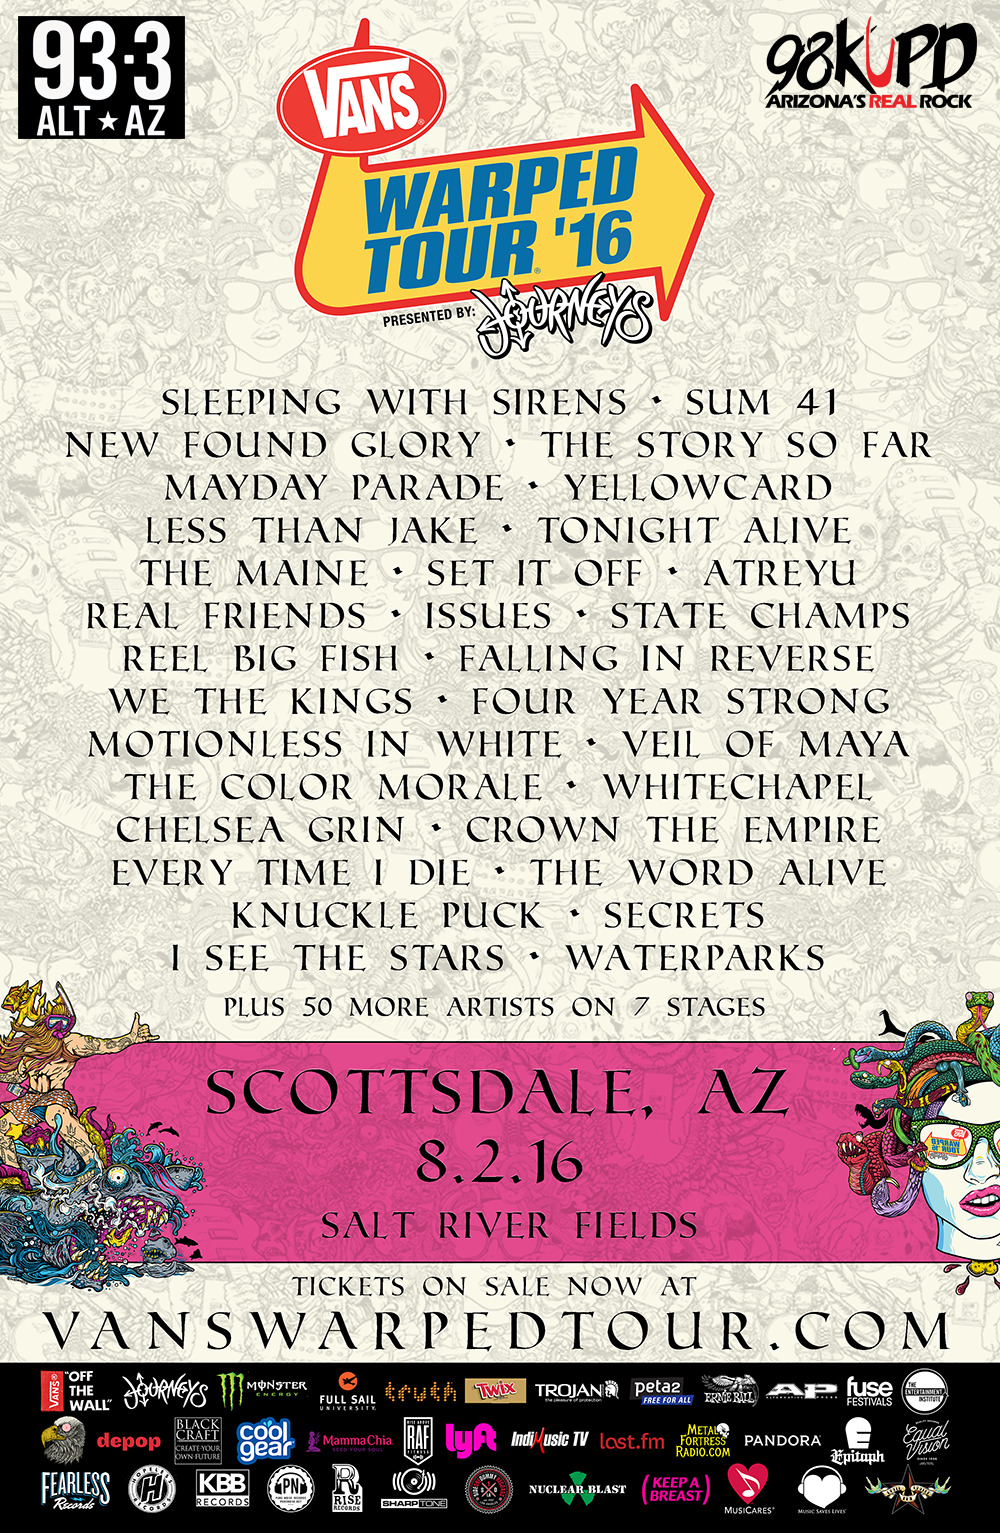 Warped Tour 2016 Phoenix Concert Poster:sleeping With Sirens, Sum 41, Yellowcard